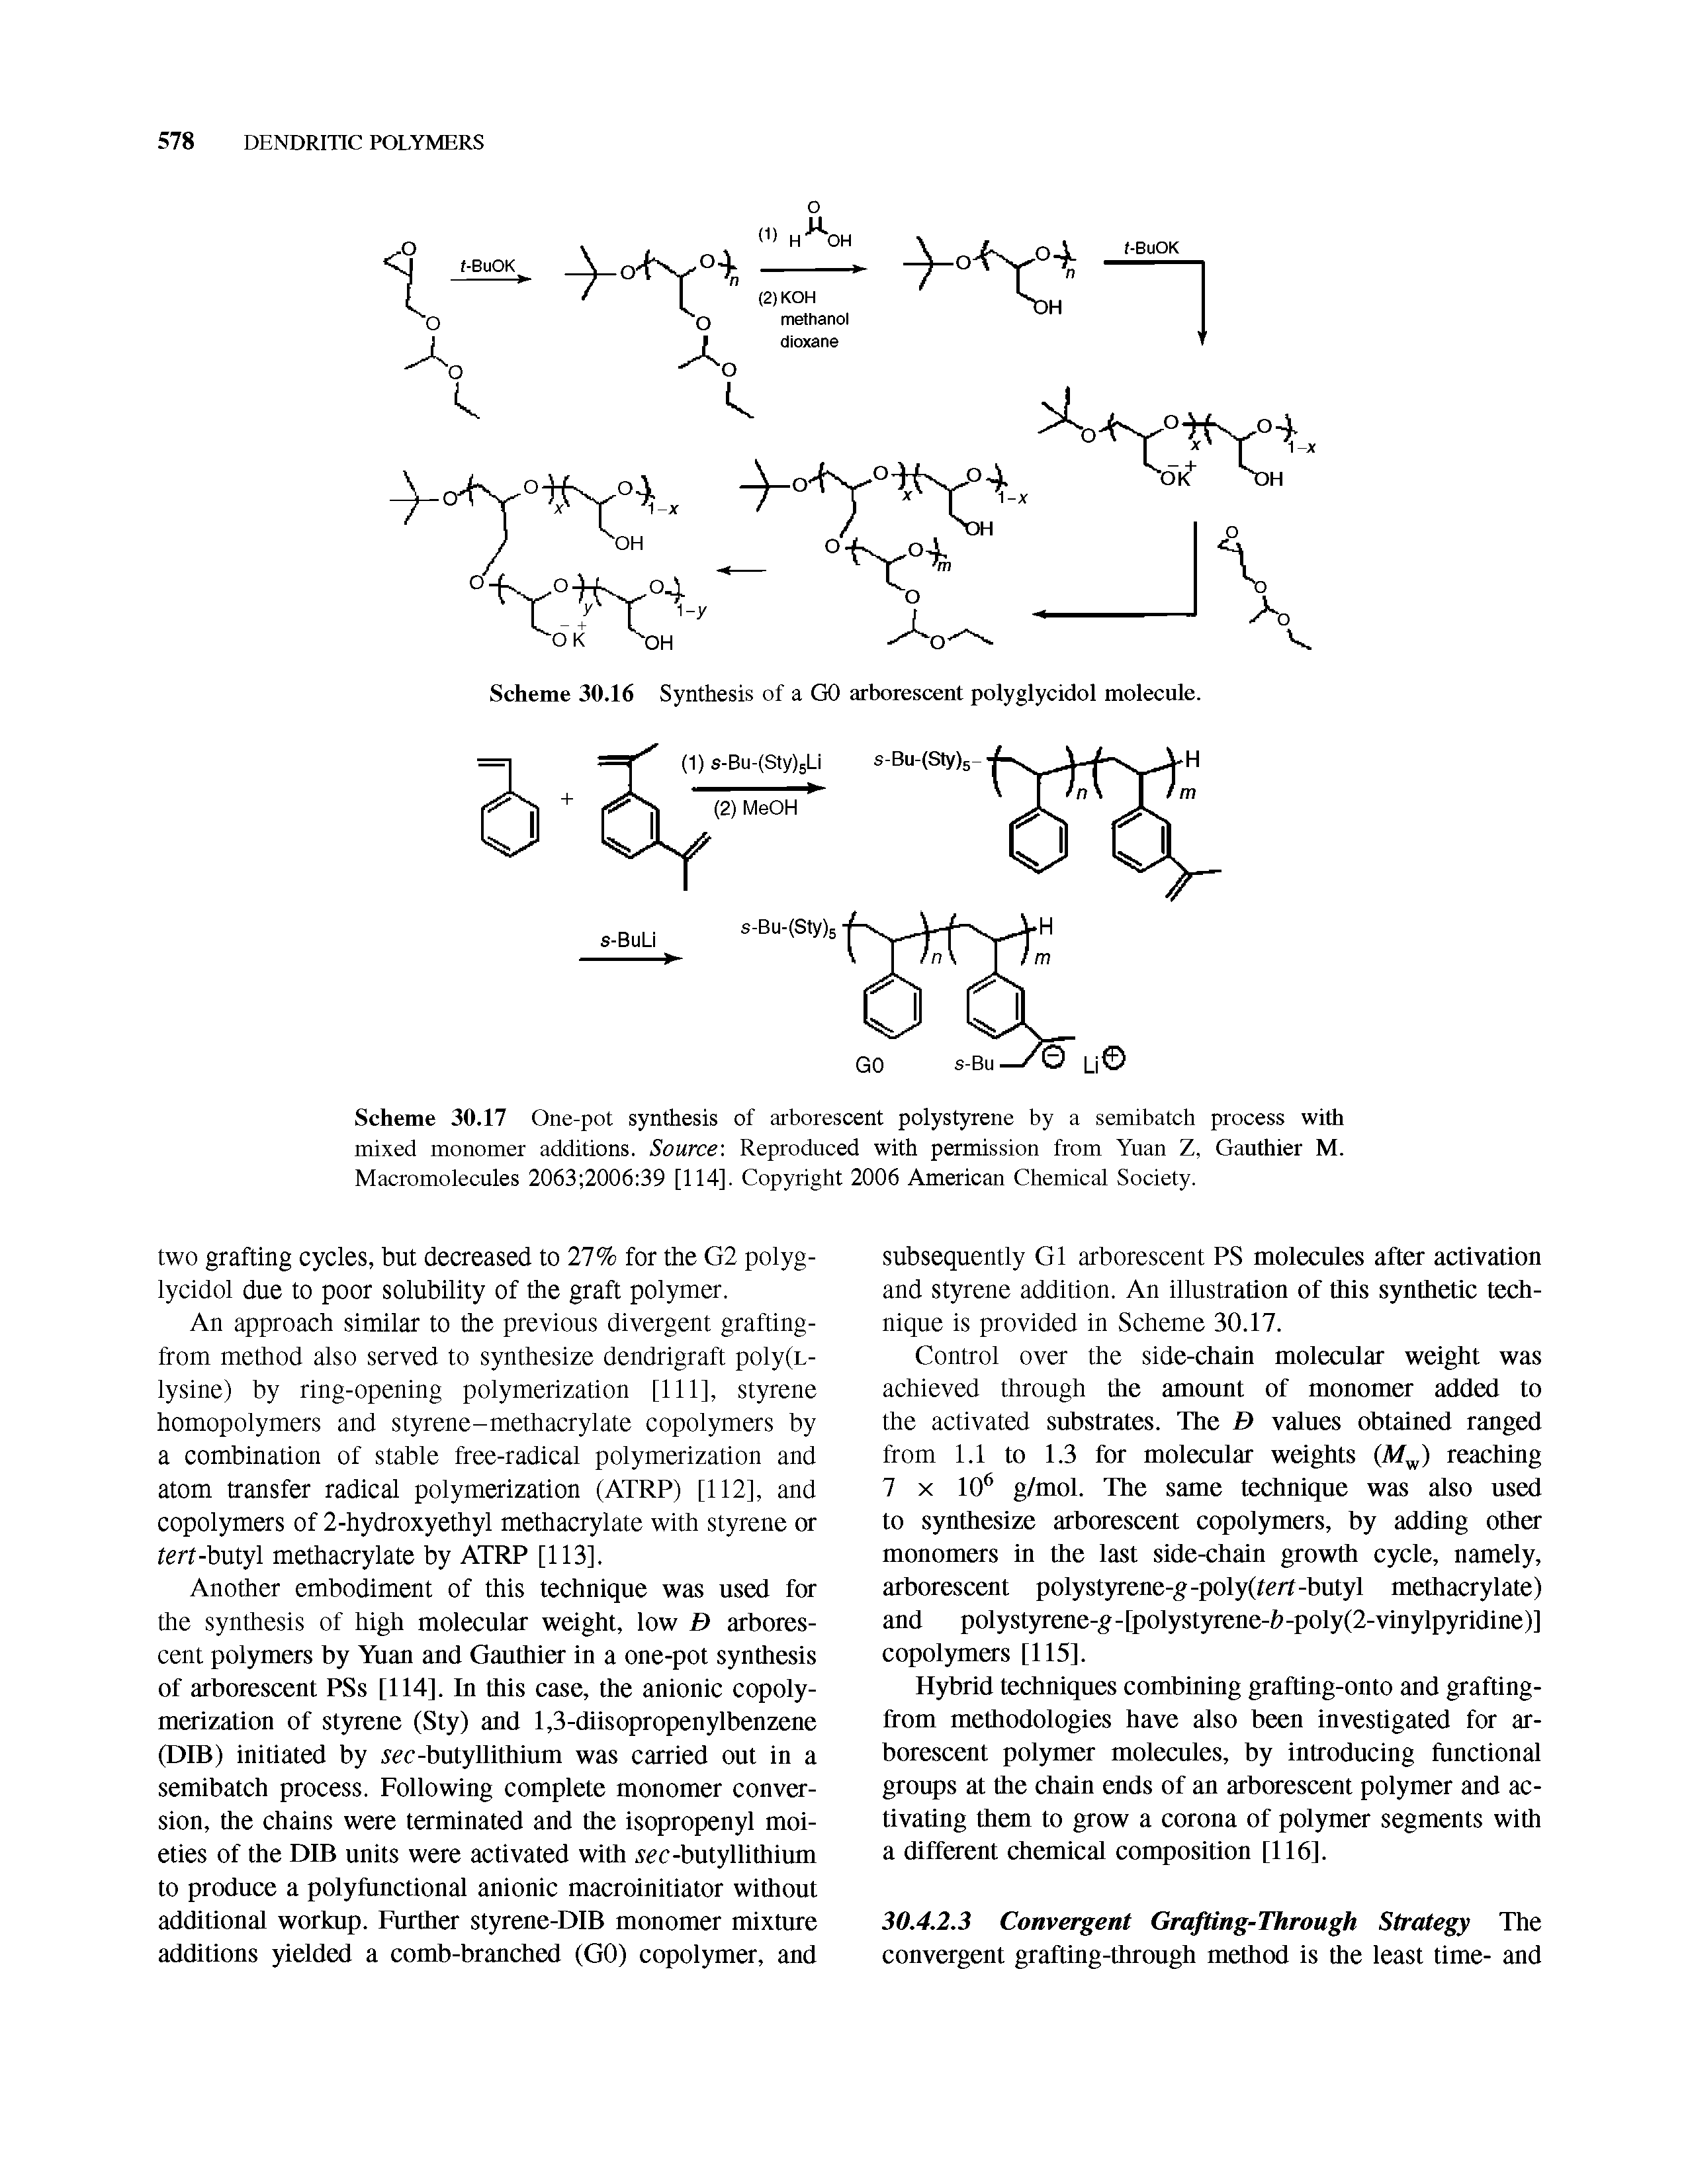 Scheme 30.17 One-pot synthesis of arborescent polystyrene by a semibatch process with mixed monomer additions. Source Reproduced with permission from Yuan Z, Gauthier M. Macromolecules 2063 2006 39 [114]. Copyright 2006 American Chemical Society.